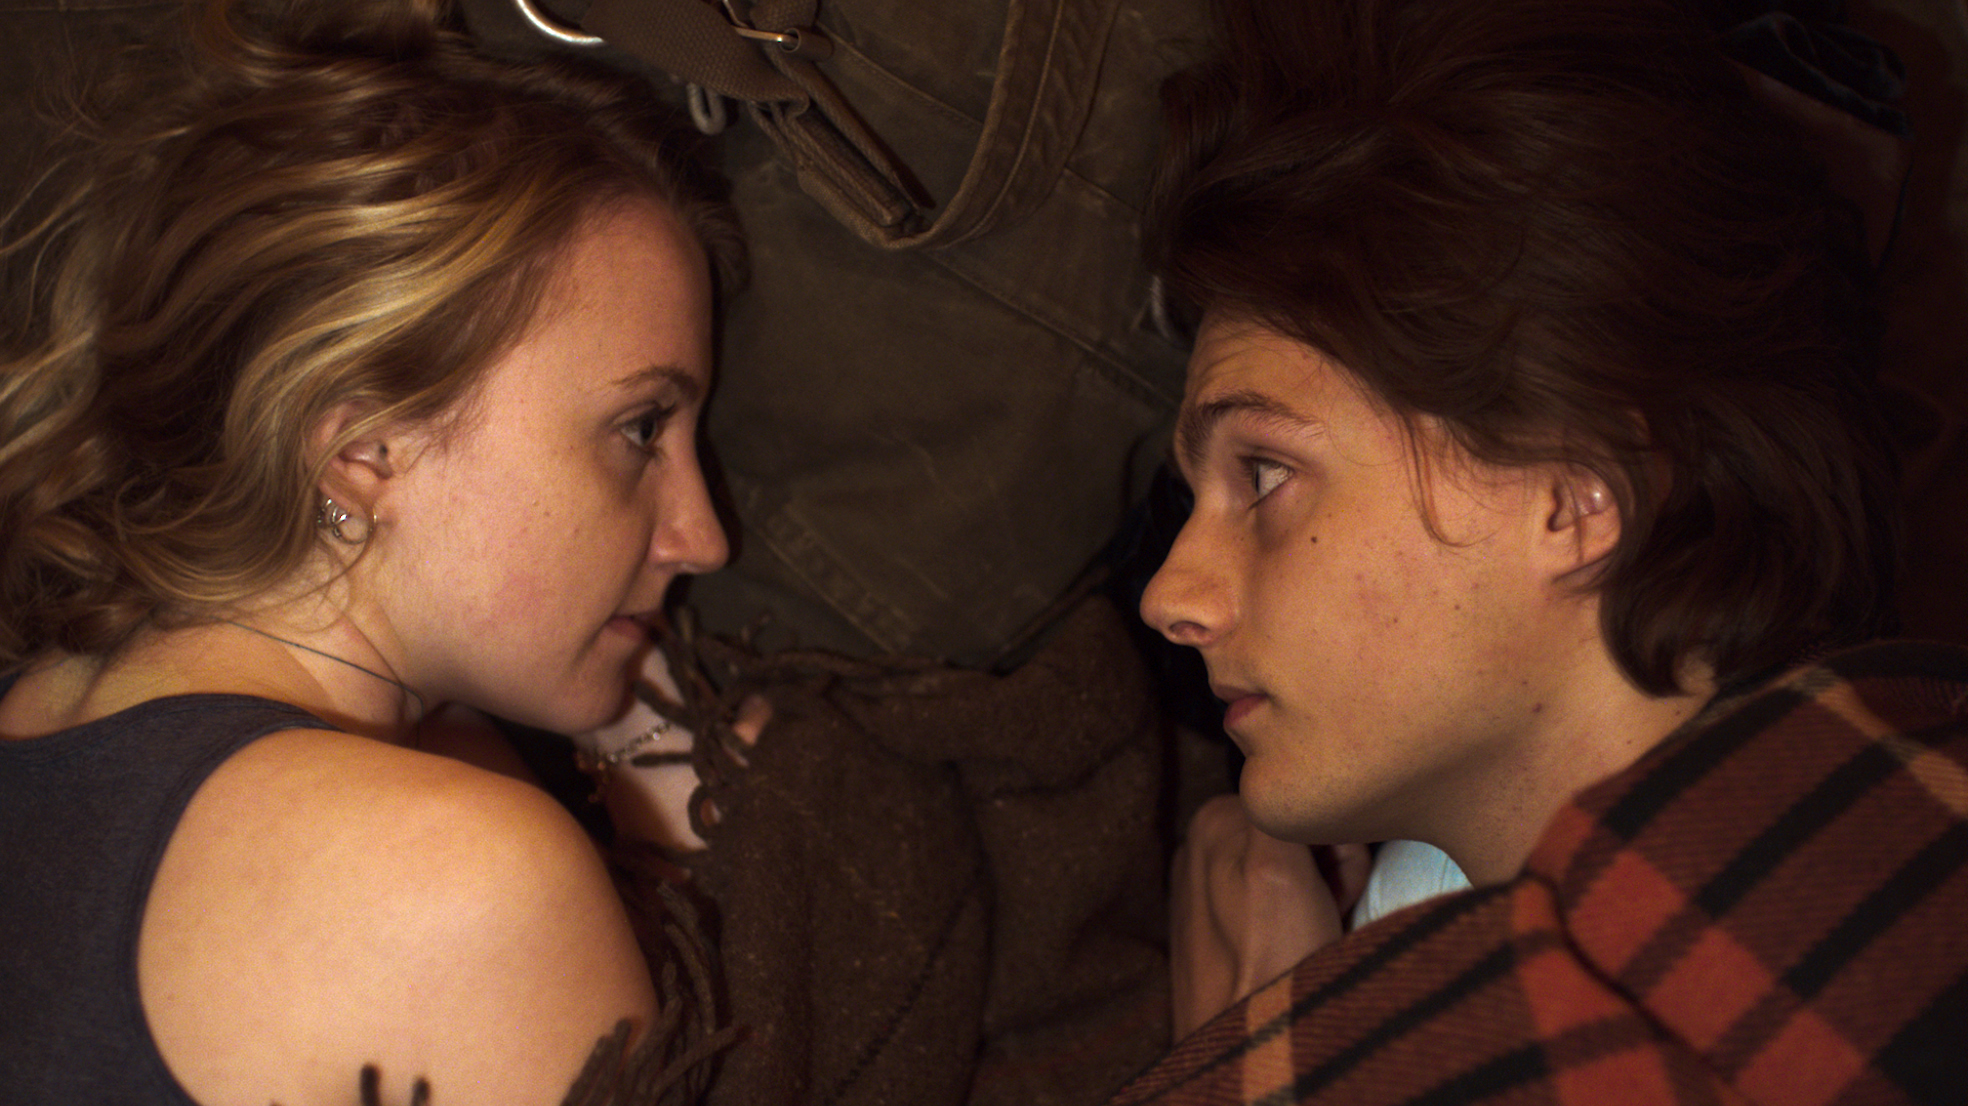 Evanna Lynch & George Webster in a scene from MY NAME IS EMILY. Photo Courtesy of Monument Releasing